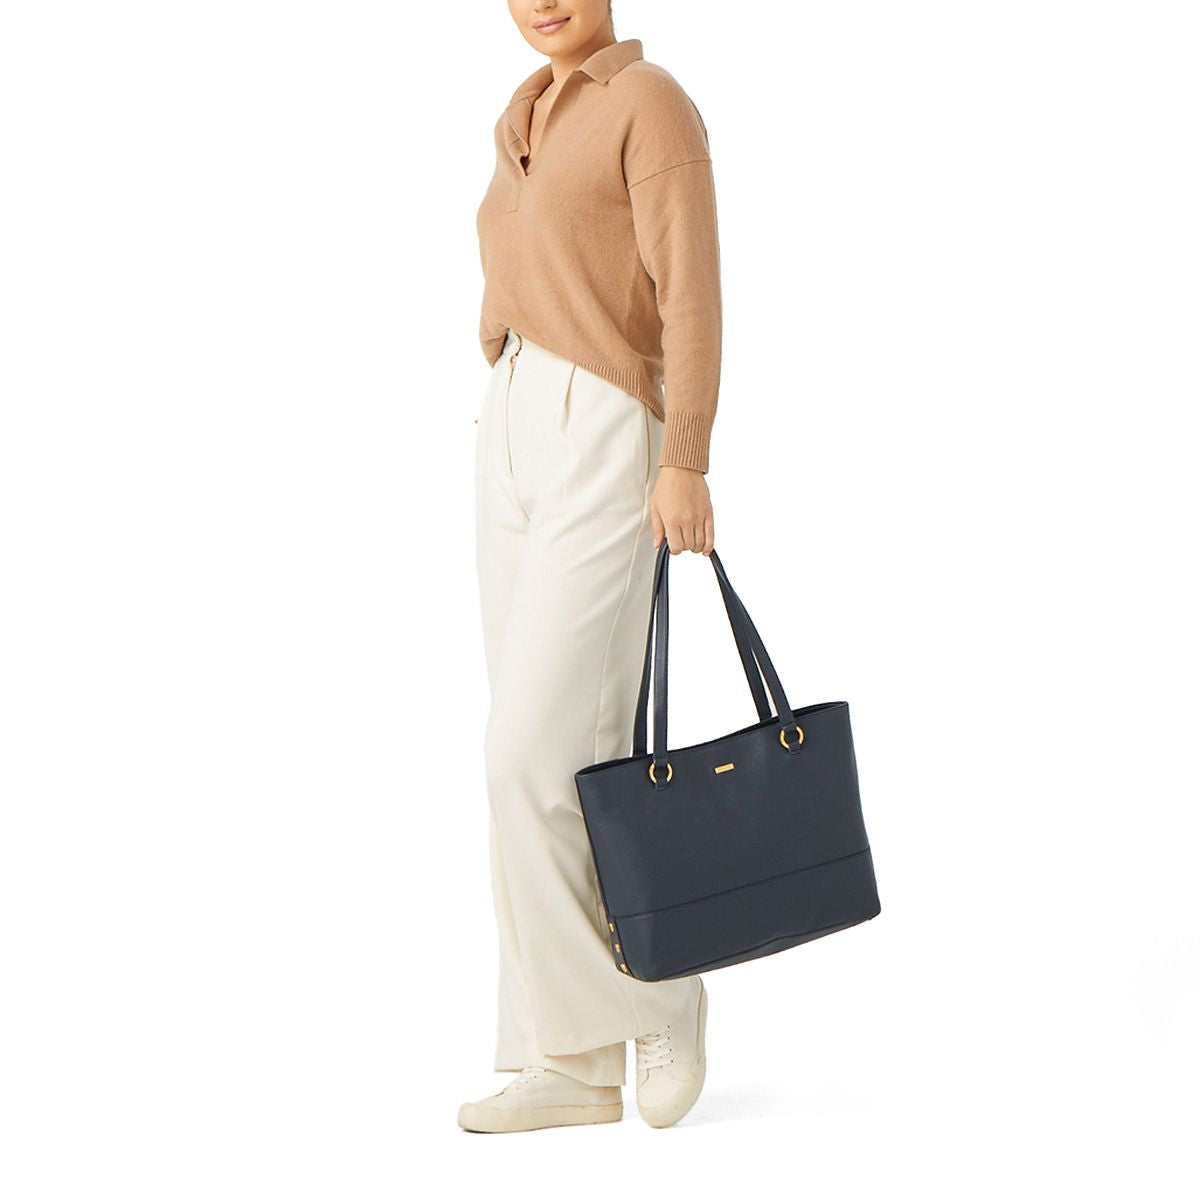 Andersen Tote in Navy Tides/Brushed Gold Craft